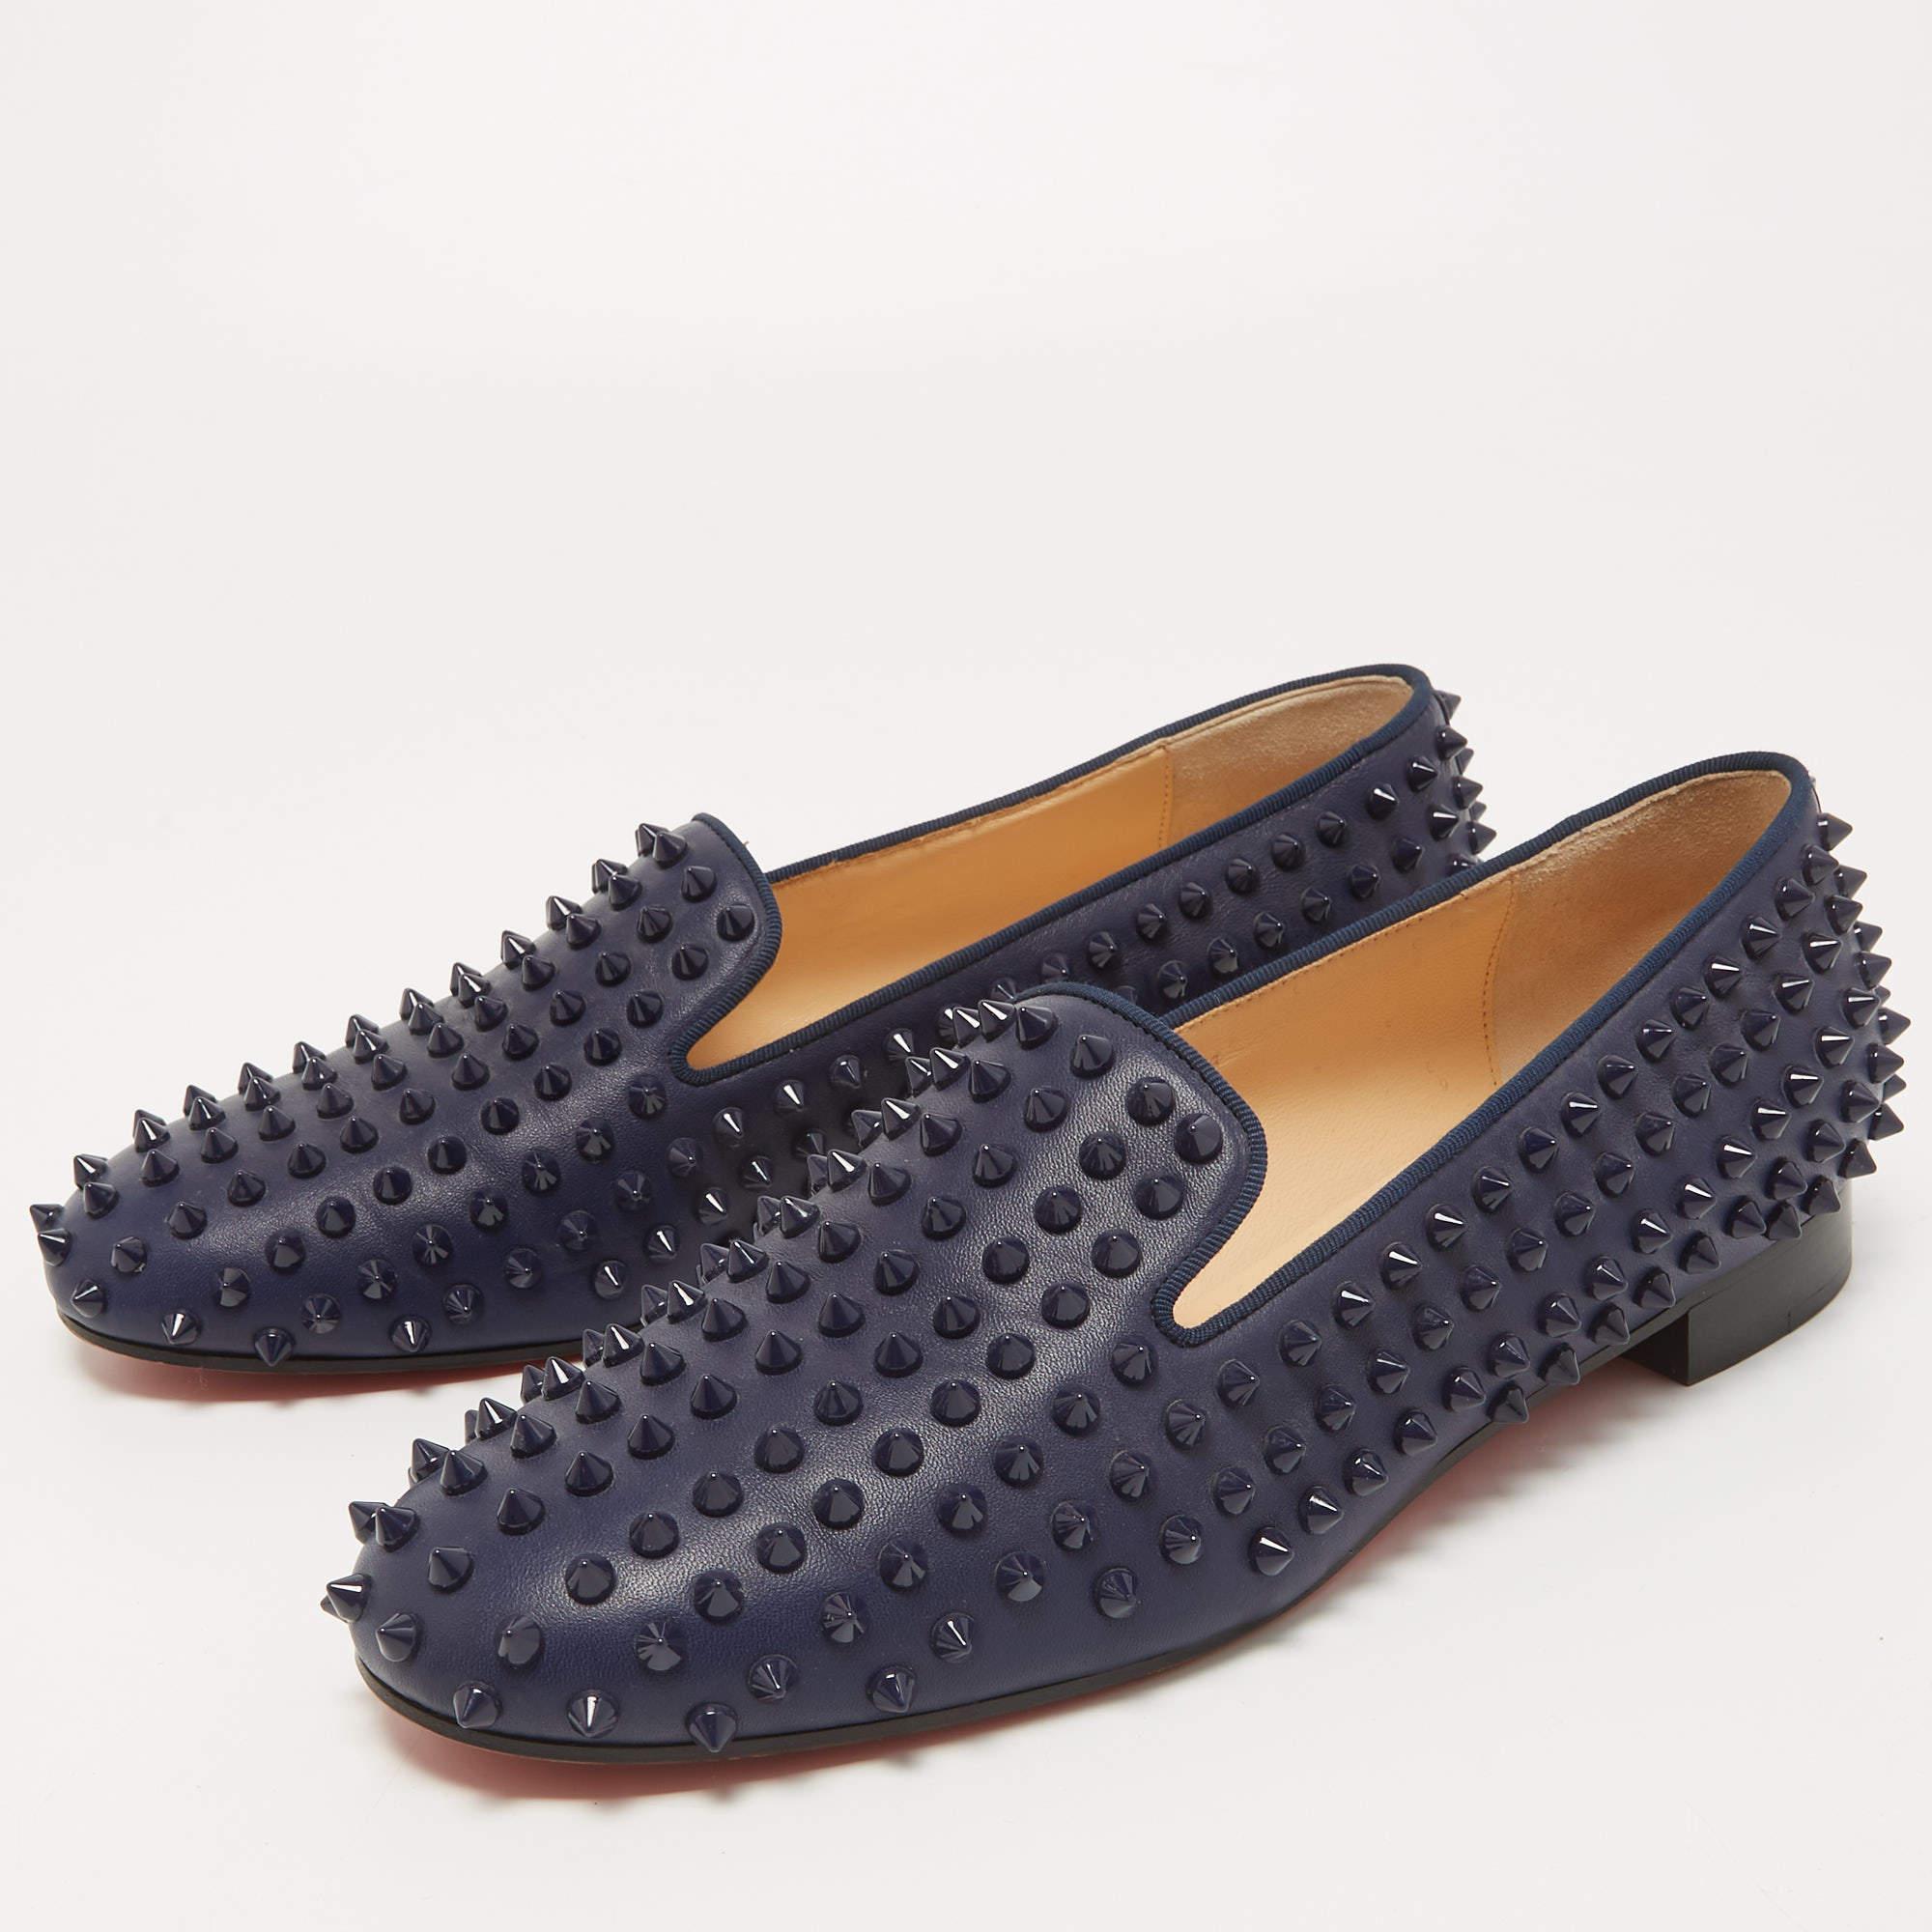 Christian Louboutin Navy Blue Leather Dandelion Spike Slip On Loafers Size 41 In Good Condition For Sale In Dubai, Al Qouz 2